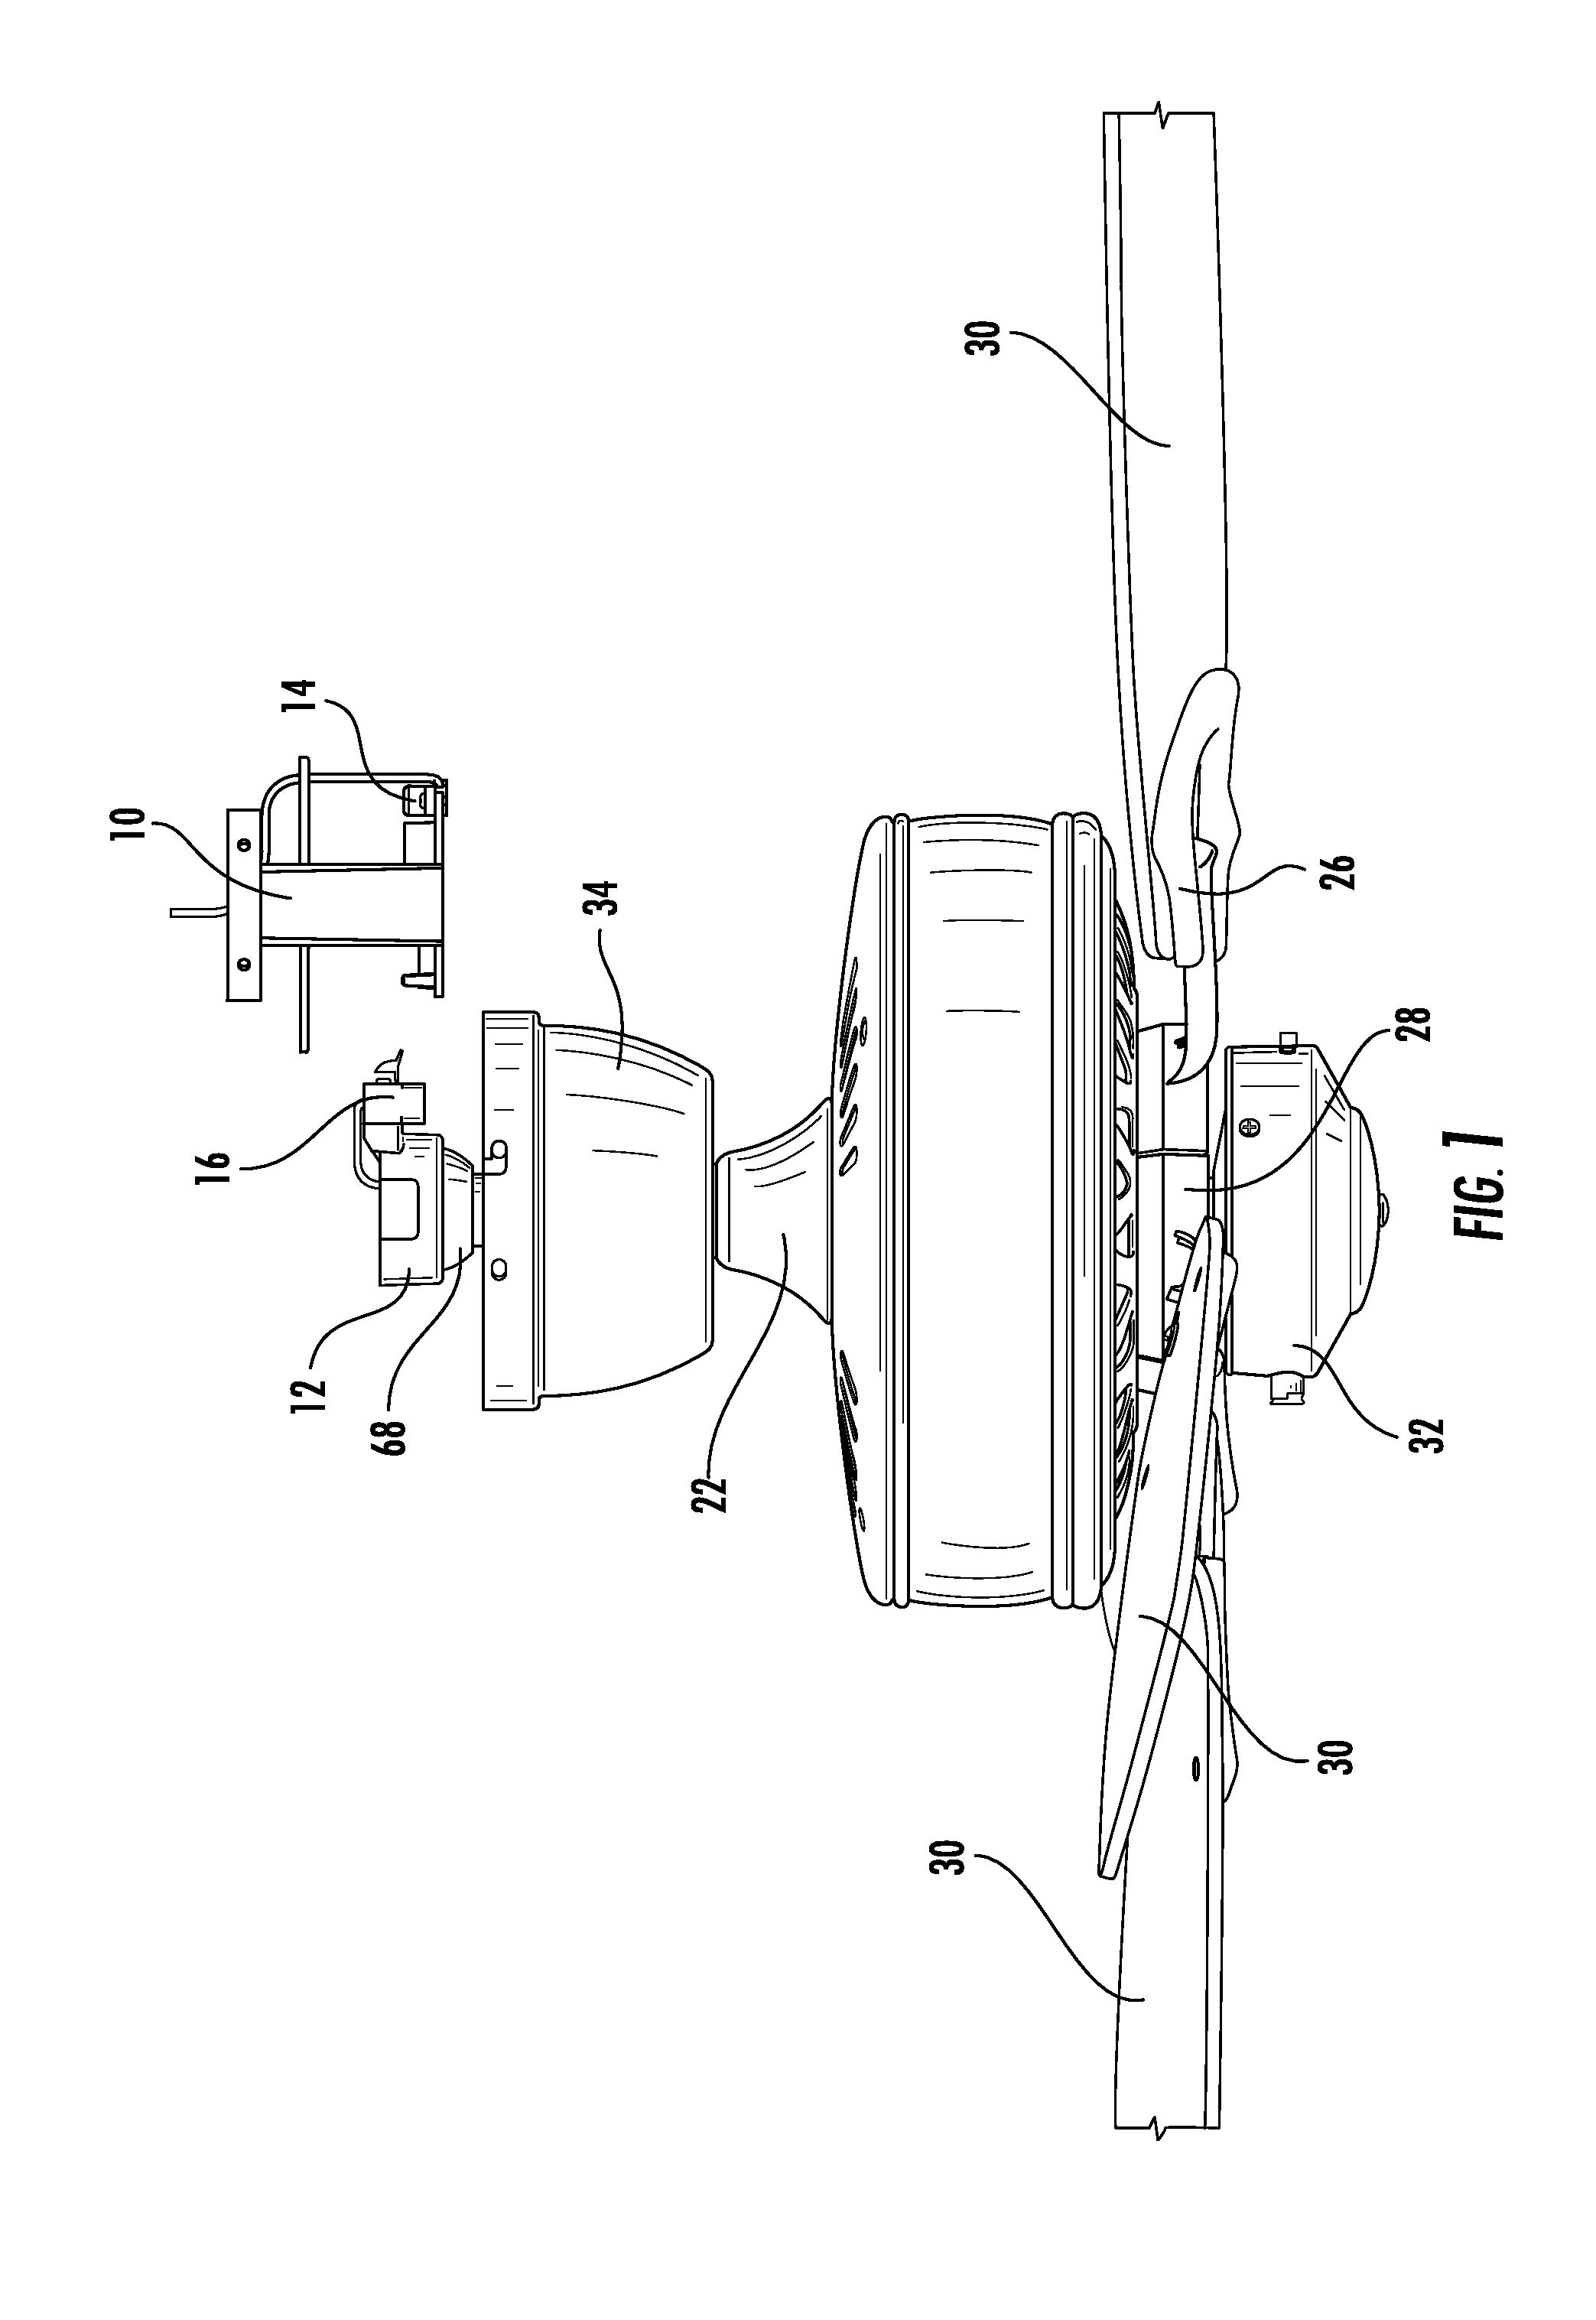 Systems And Methods For Mounting Electrically Powered Devices To Ceilings And Other Structures